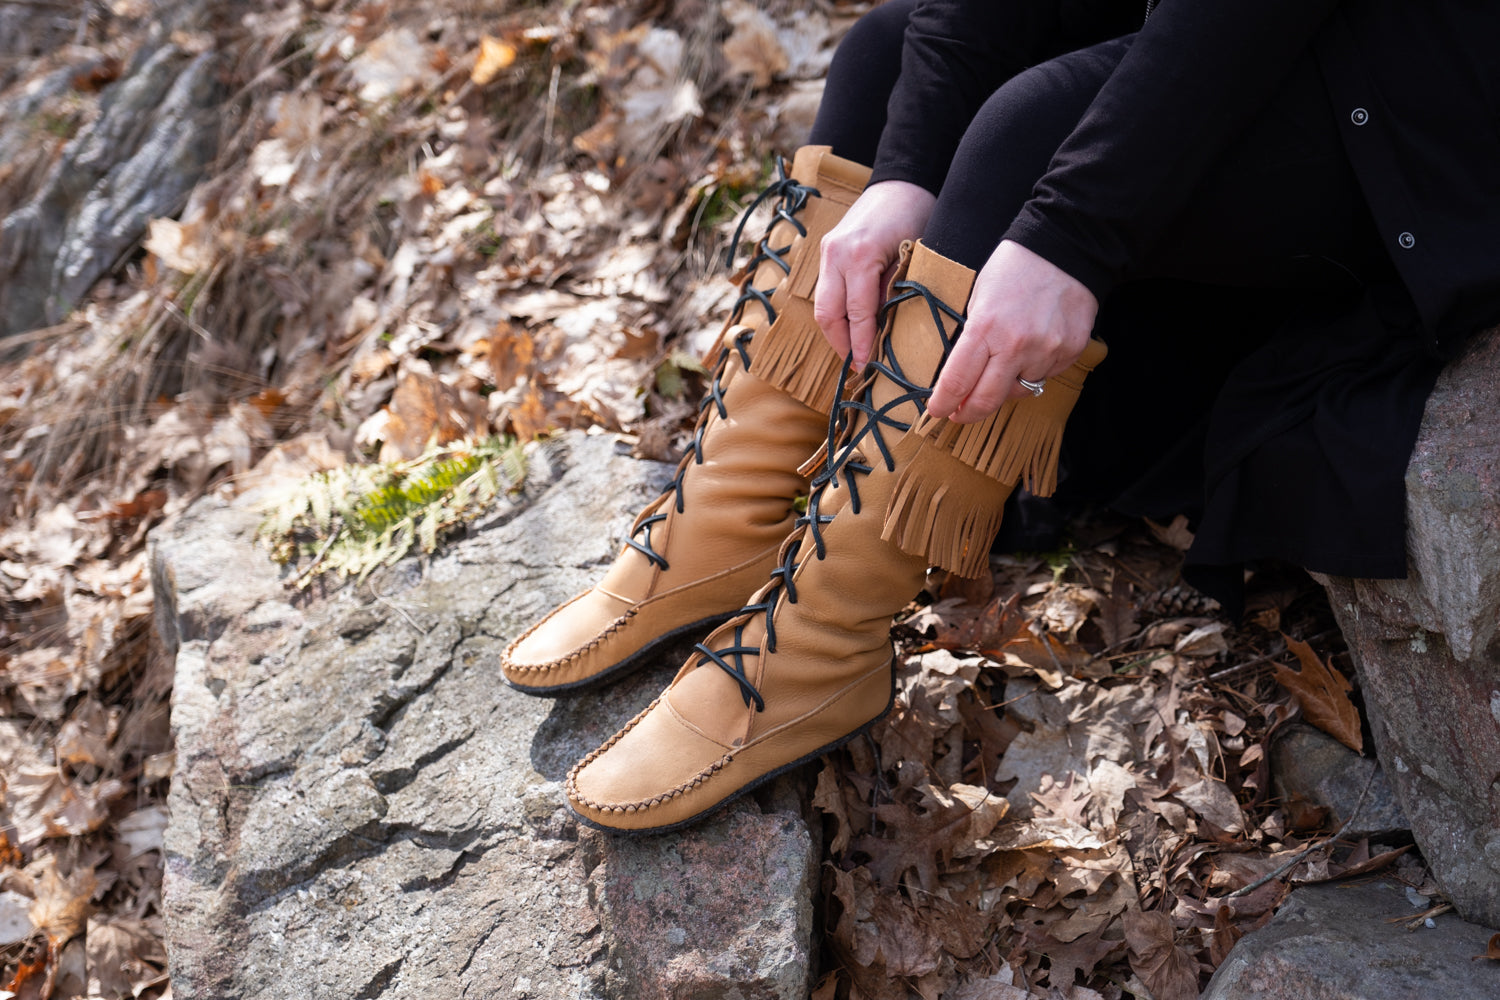 Women's Knee-High Moccasin Boots